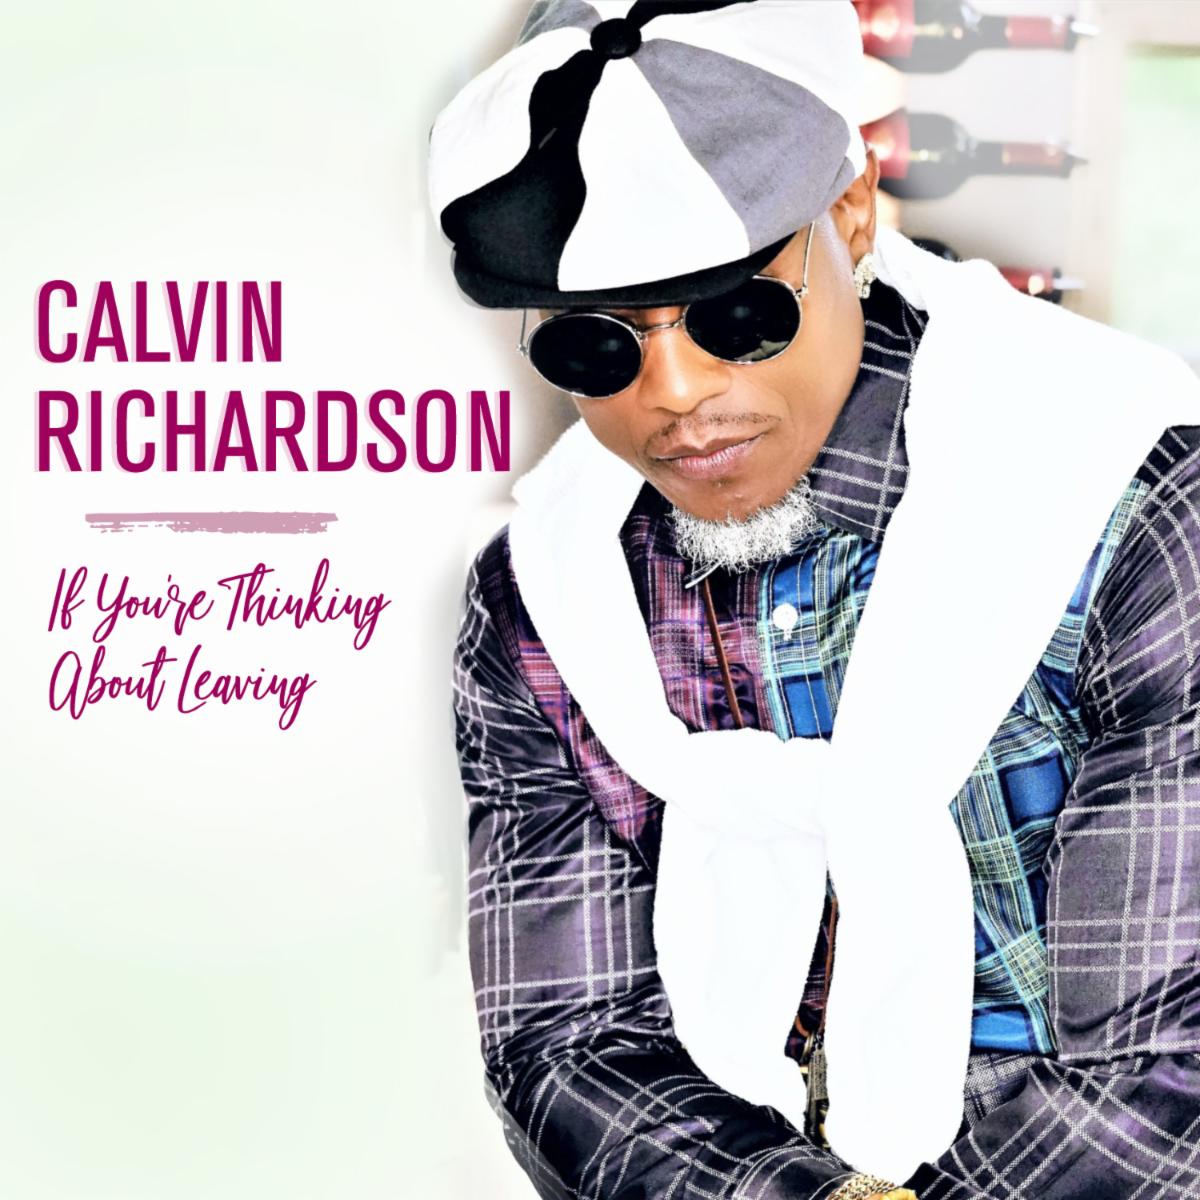 New Music: Calvin Richardson – If You’re Thinking About Leaving